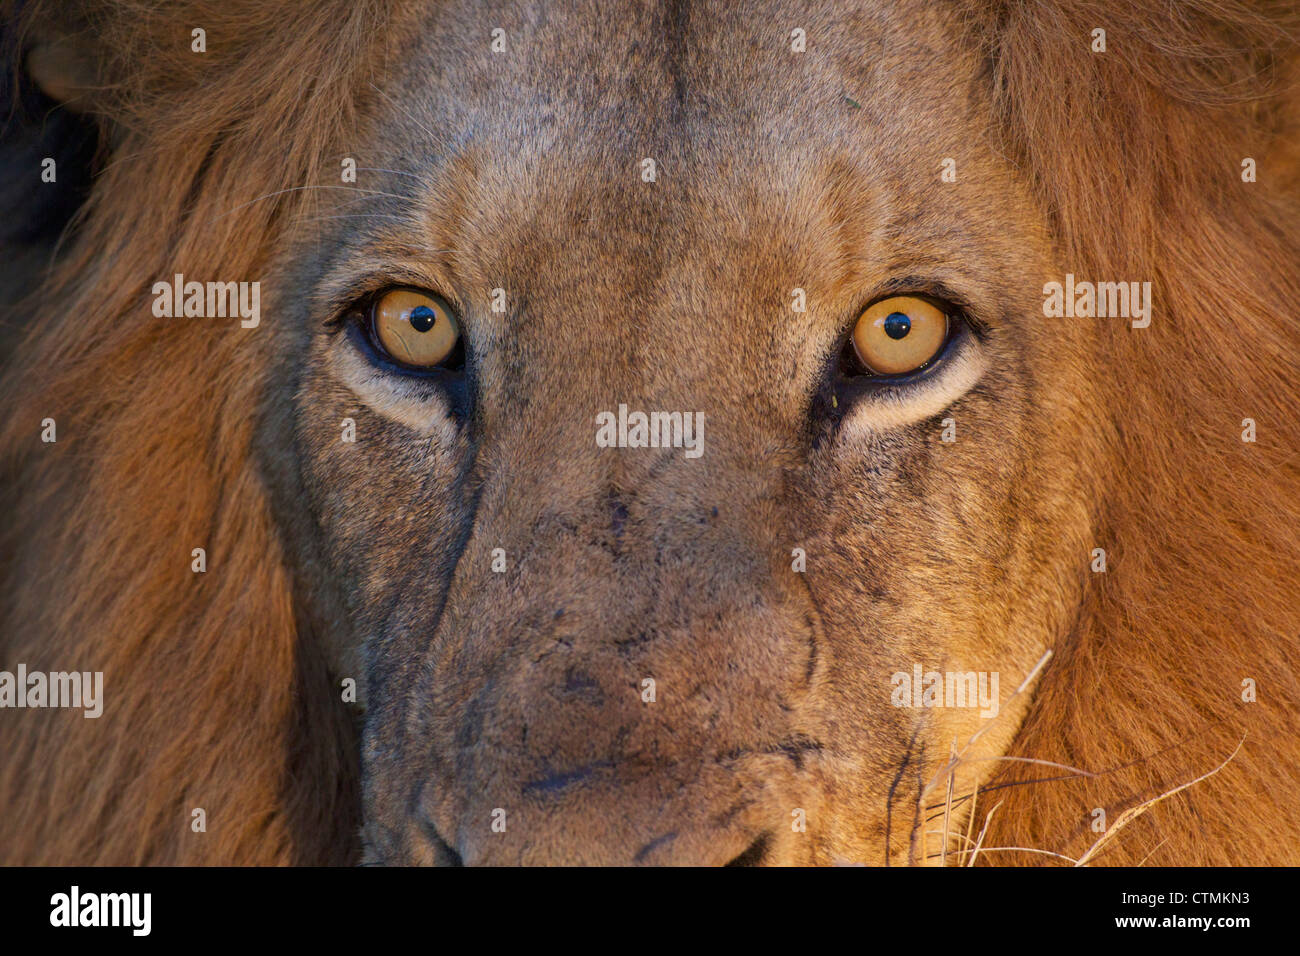 A close up of a Lions eyes looking directly at the camera, Kapama Private Game Reserve, Hoedspruit, Mpumalanga, South Africa Stock Photo